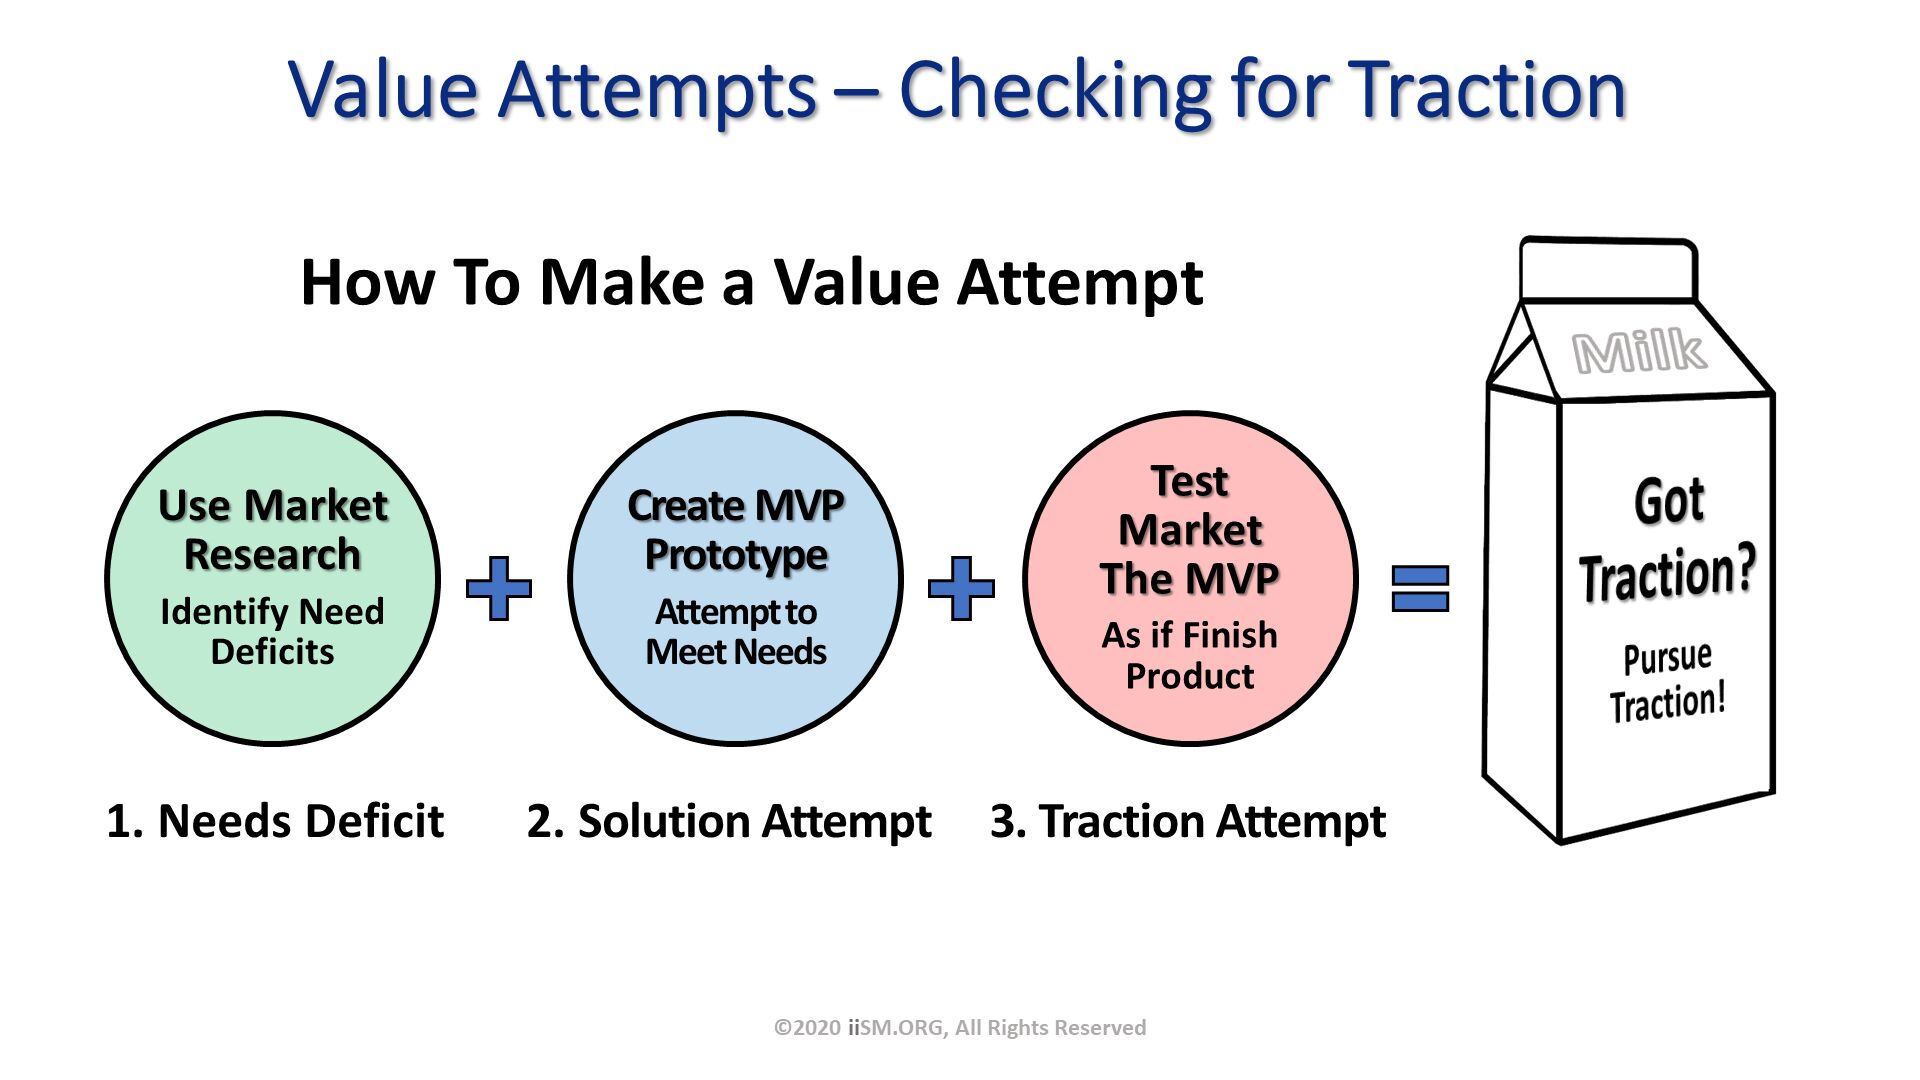 Value Attempts – Checking for Traction. ©2020 iiSM.ORG, All Rights Reserved. Use Market Research
Identify Need Deficits. Create MVP Prototype
Attempt to Meet Needs. Test Market The MVP 
As if Finish Product. How To Make a Value Attempt. Got Traction?. 1. Needs Deficit. 2. Solution Attempt. 3. Traction Attempt. PursueTraction!. Milk. 